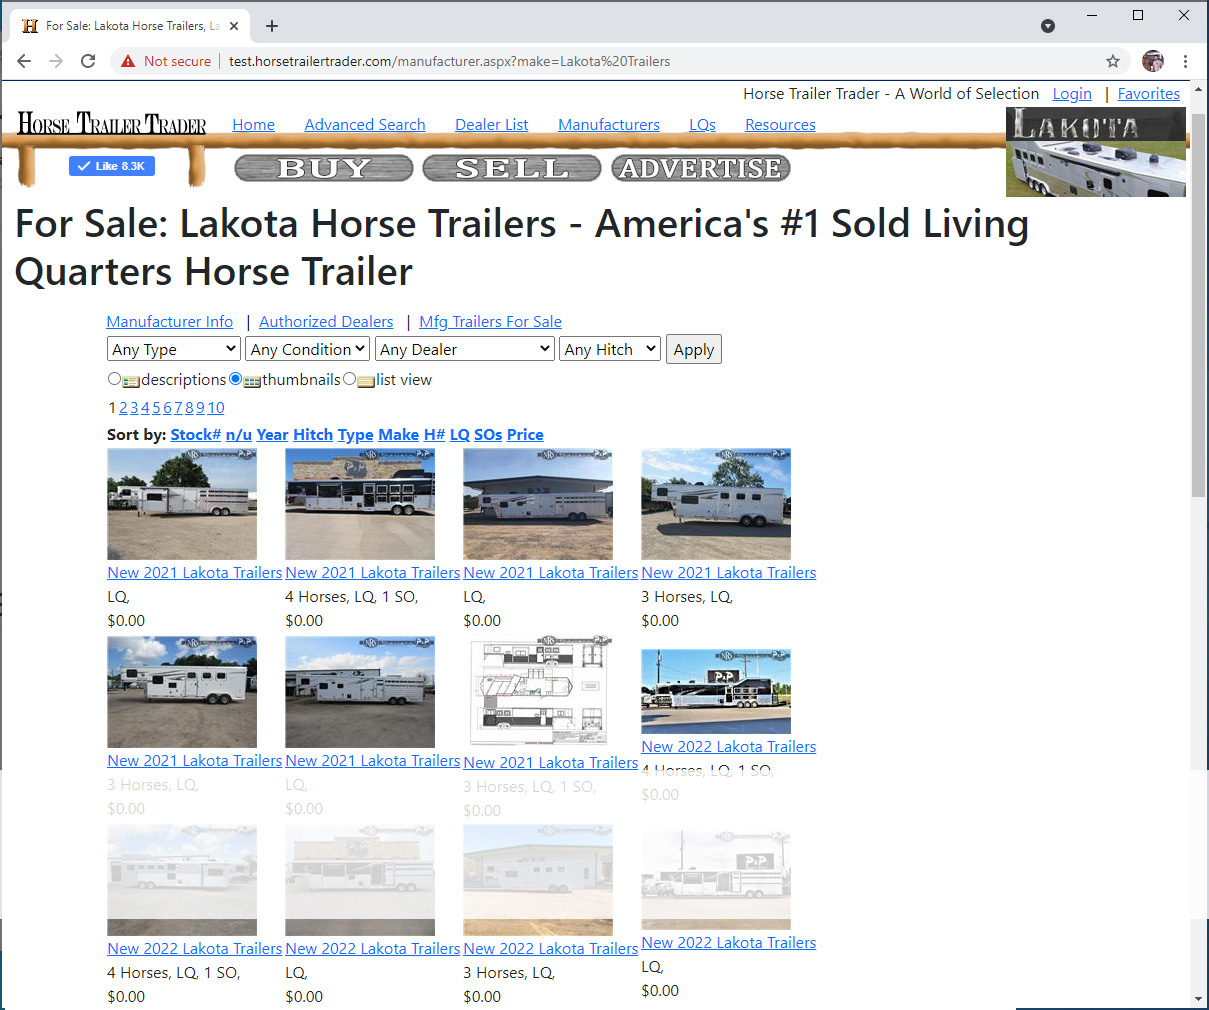 Browse horse trailers for sale by trailer brands